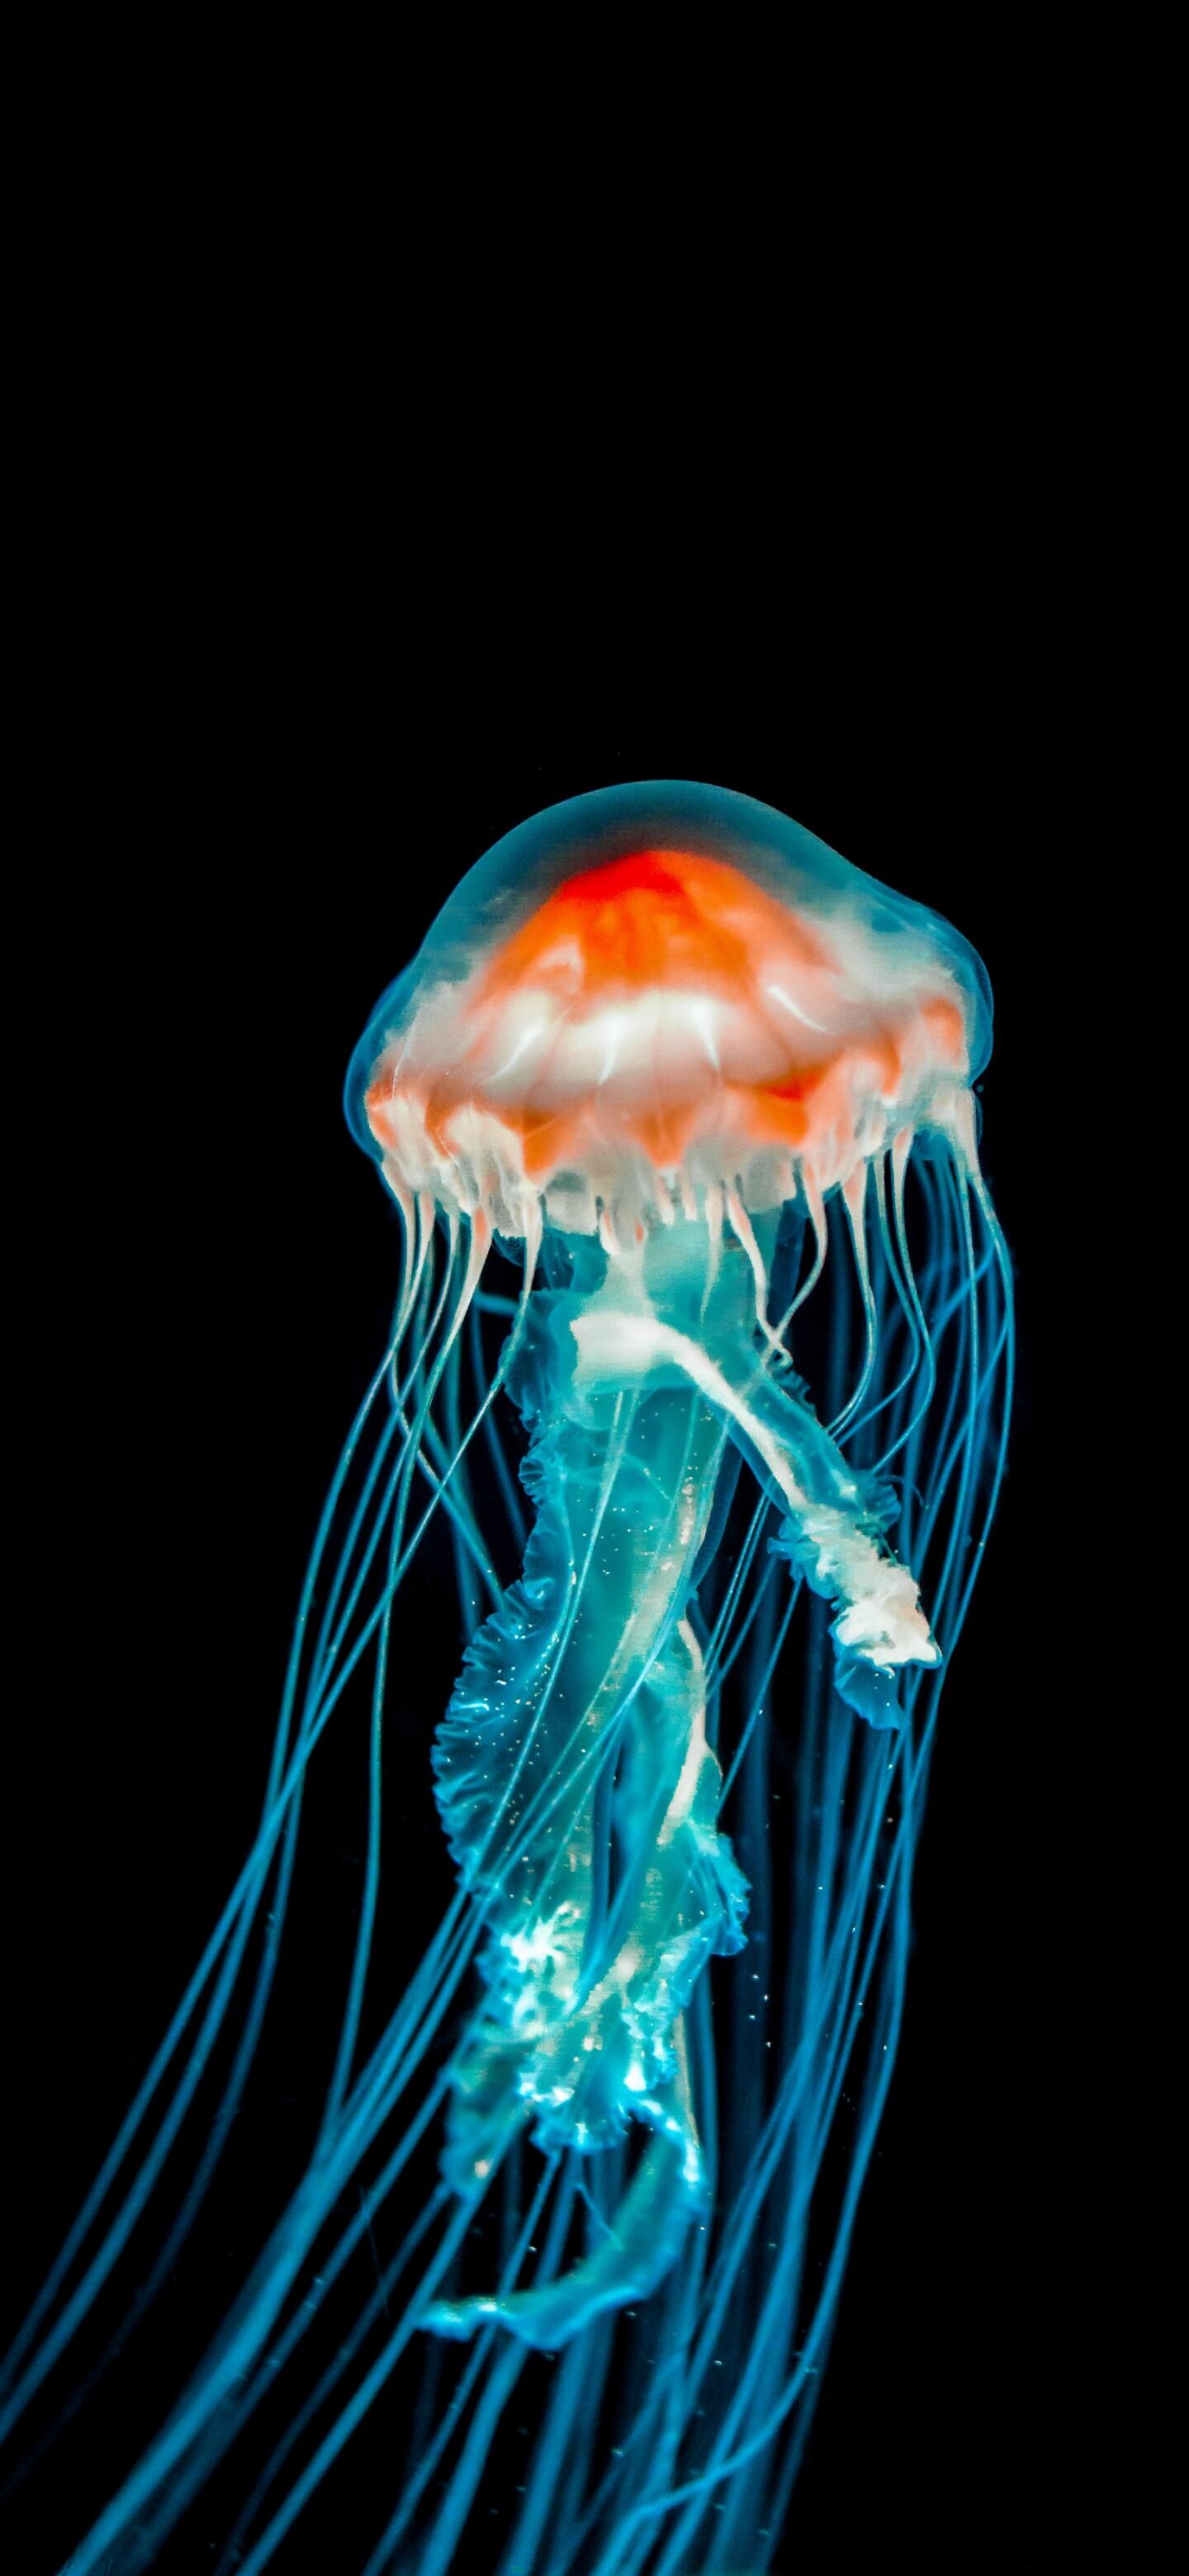 Glowing Jellyfish: Sea jelly, A nearly transparent saucer-shaped body, Extensible marginal tentacles studded with stinging cells. 1440x3120 HD Wallpaper.